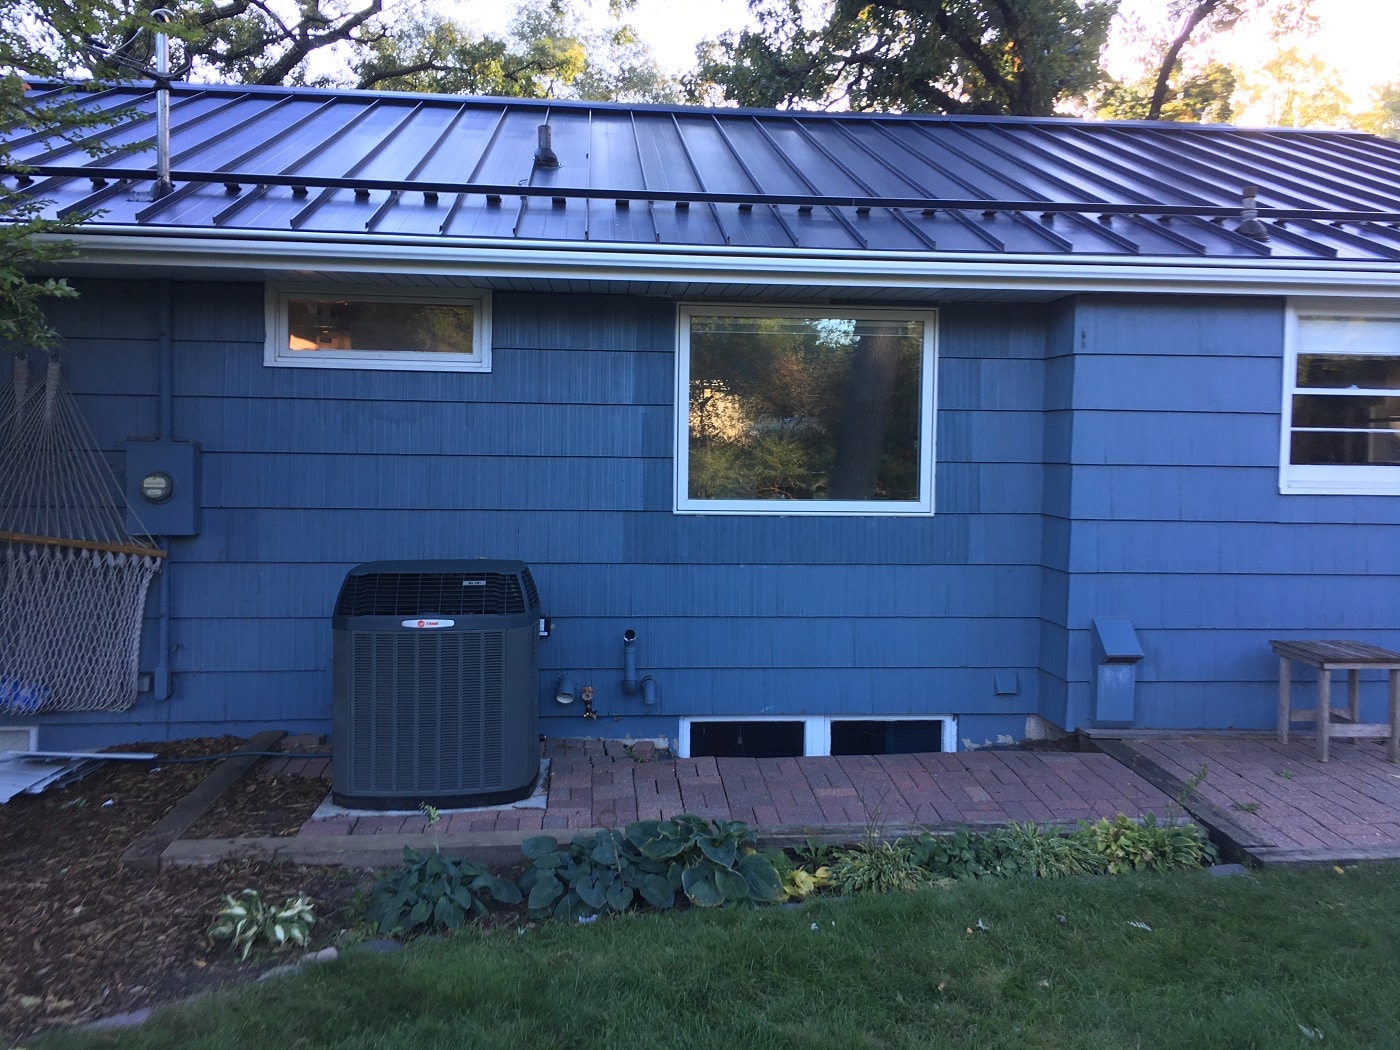 Metal roof on a home with blue siding